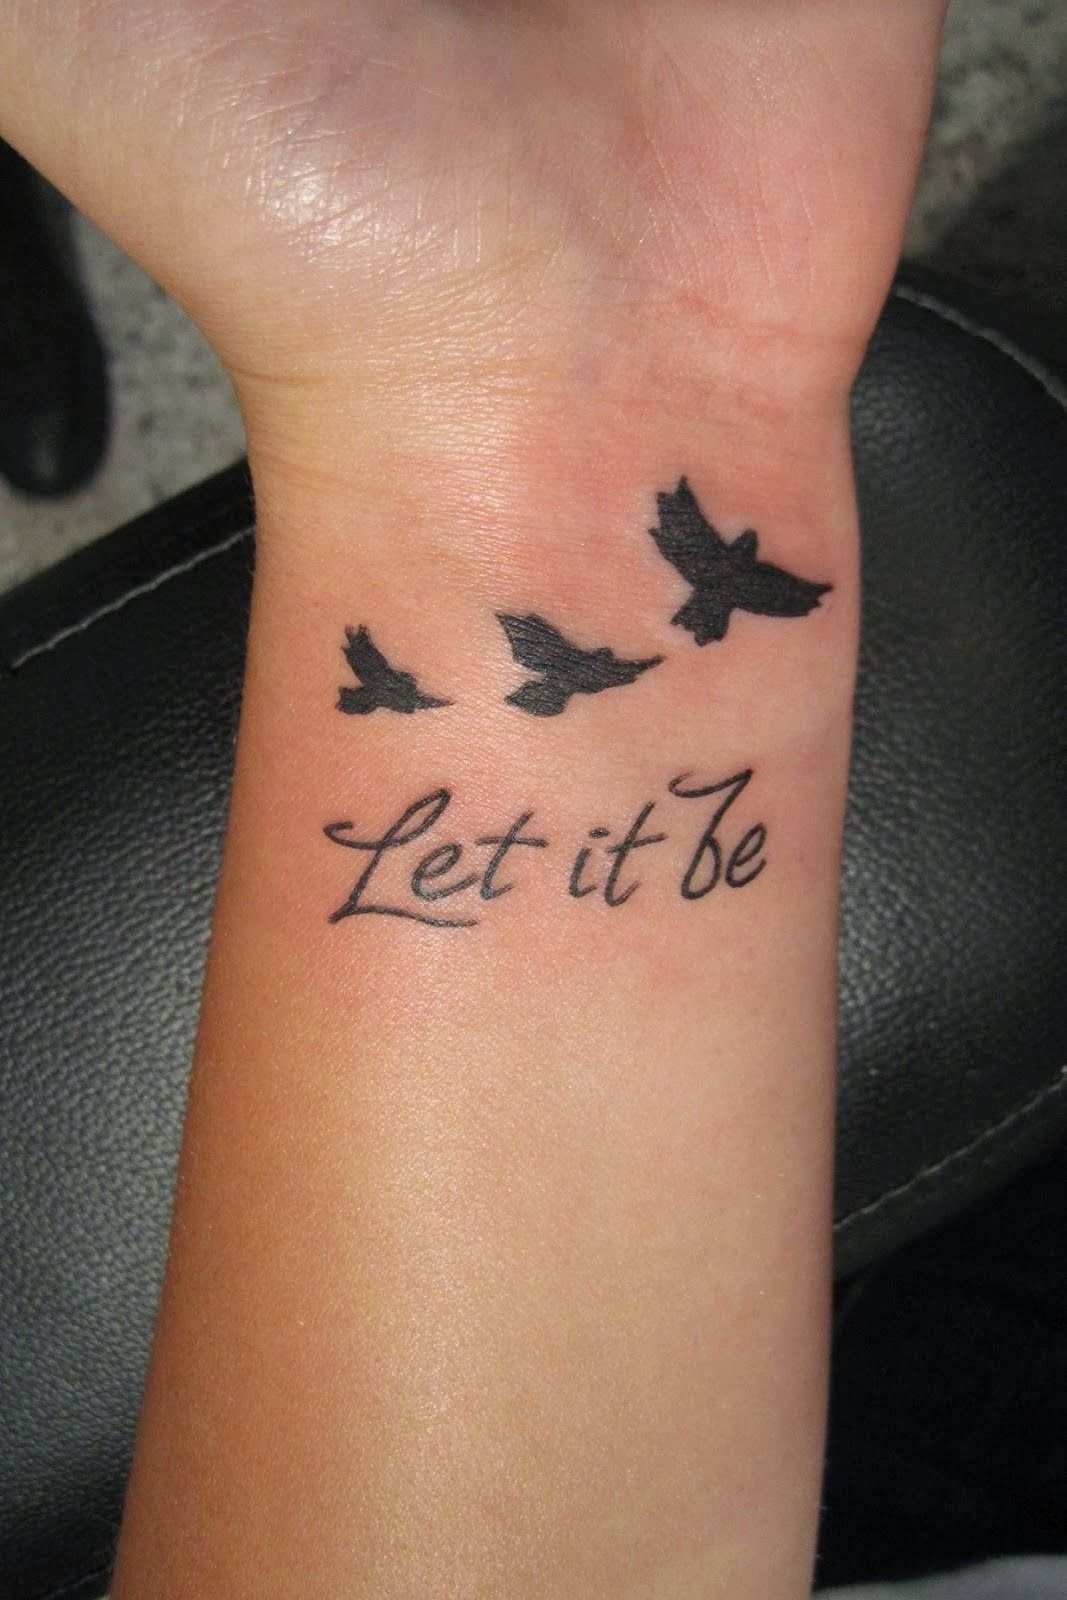 Let It Be Writing And Flying Birds Tattoo On Wrist Tattoo Mania inside dimensions 1067 X 1600